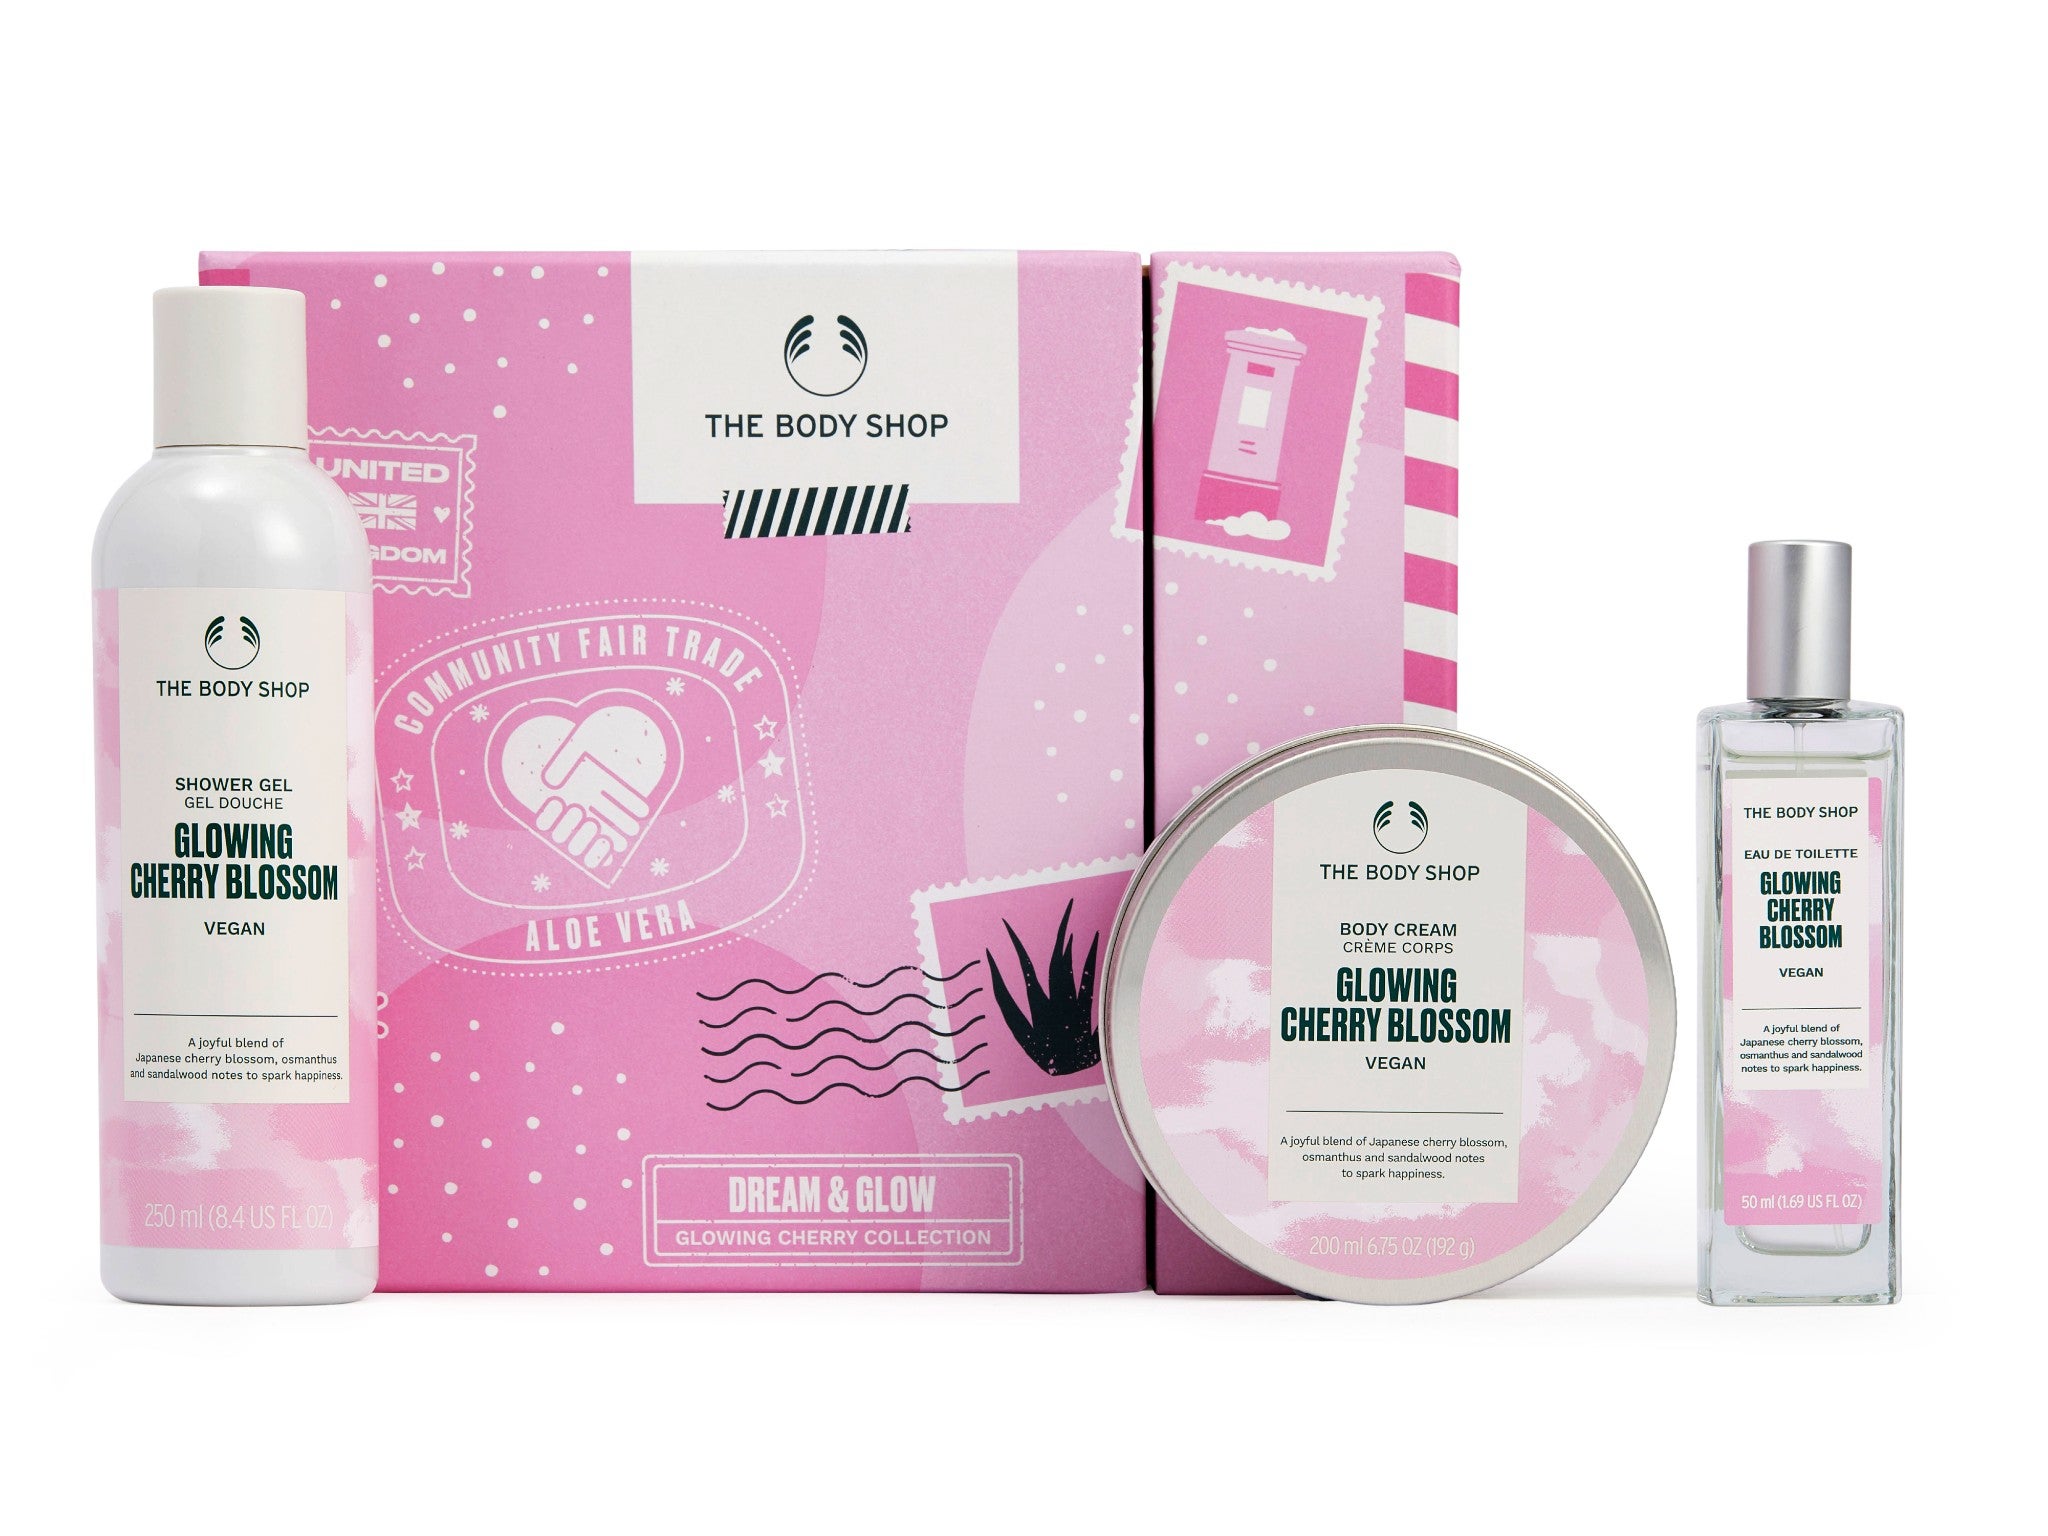 The Body Shop dream and glow Christmas gift